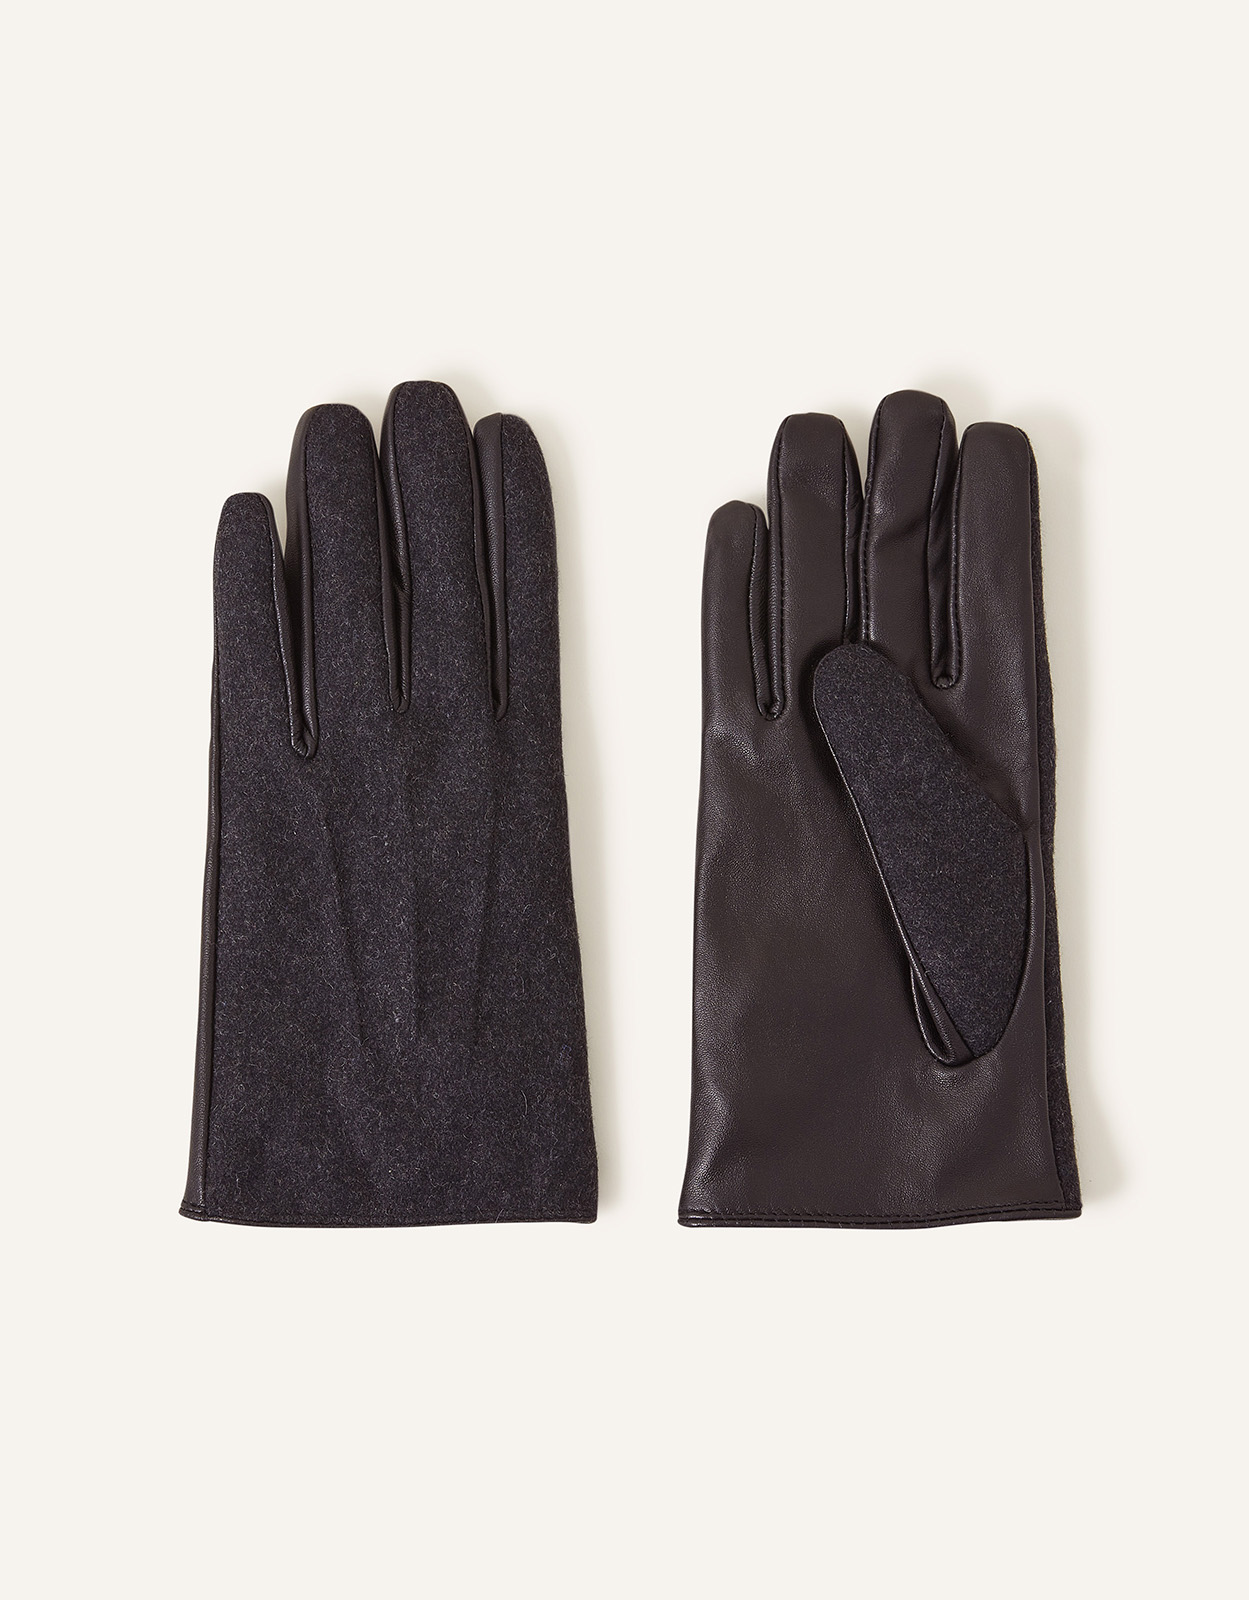 Accessorize Leather Gloves in Wool Blend Grey, Size: One Size